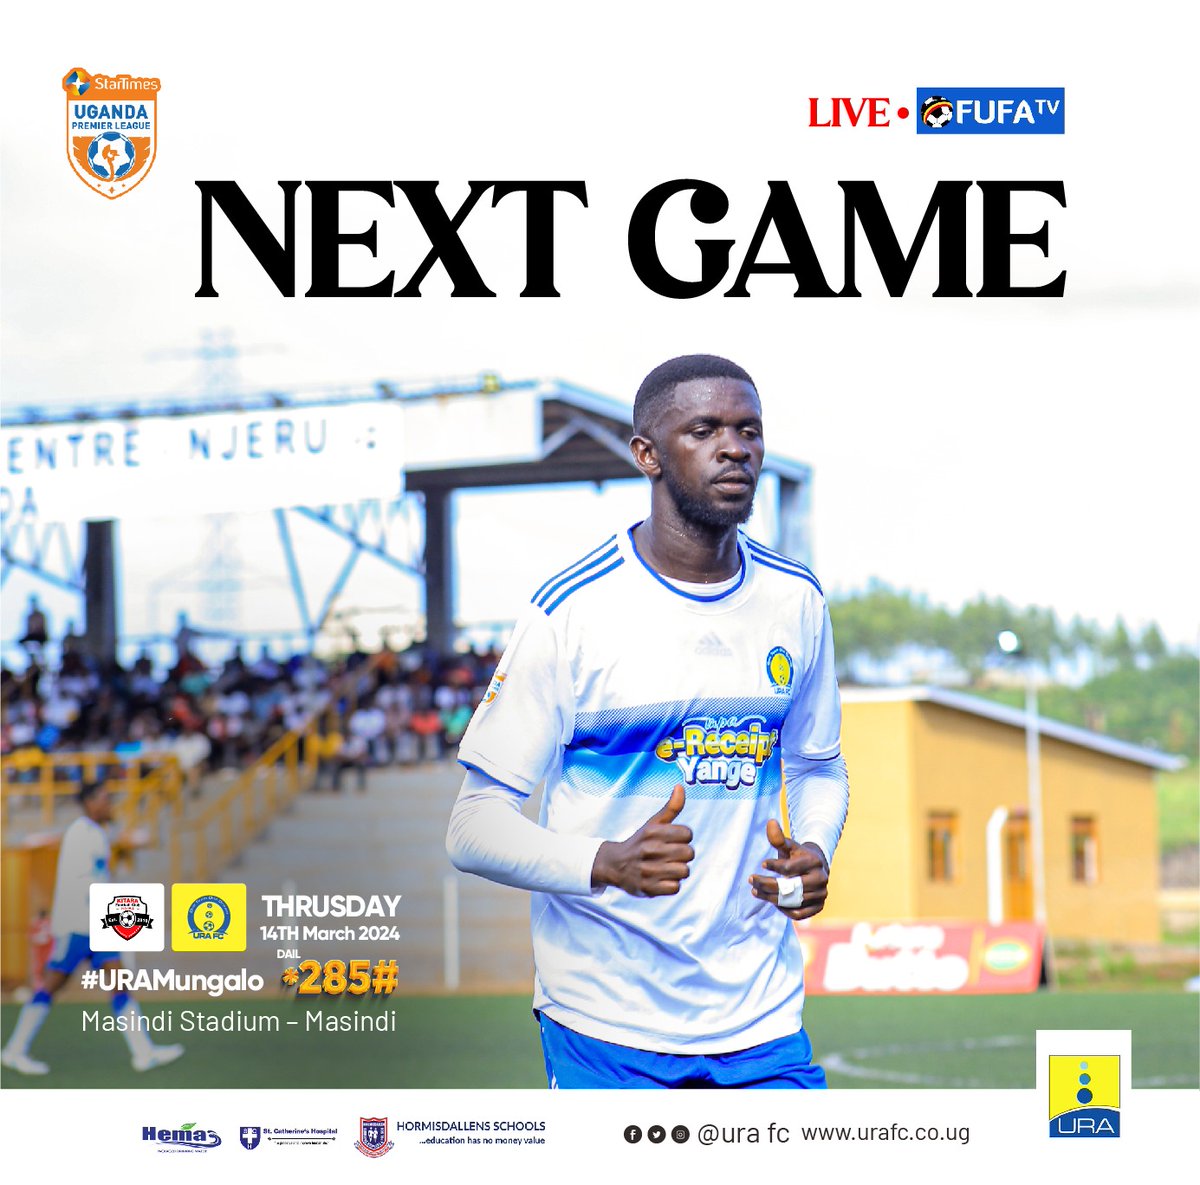 Another chance to better ourselves! See you then Tax Collectors ⚪️🔵🟡 @URAFC_Official